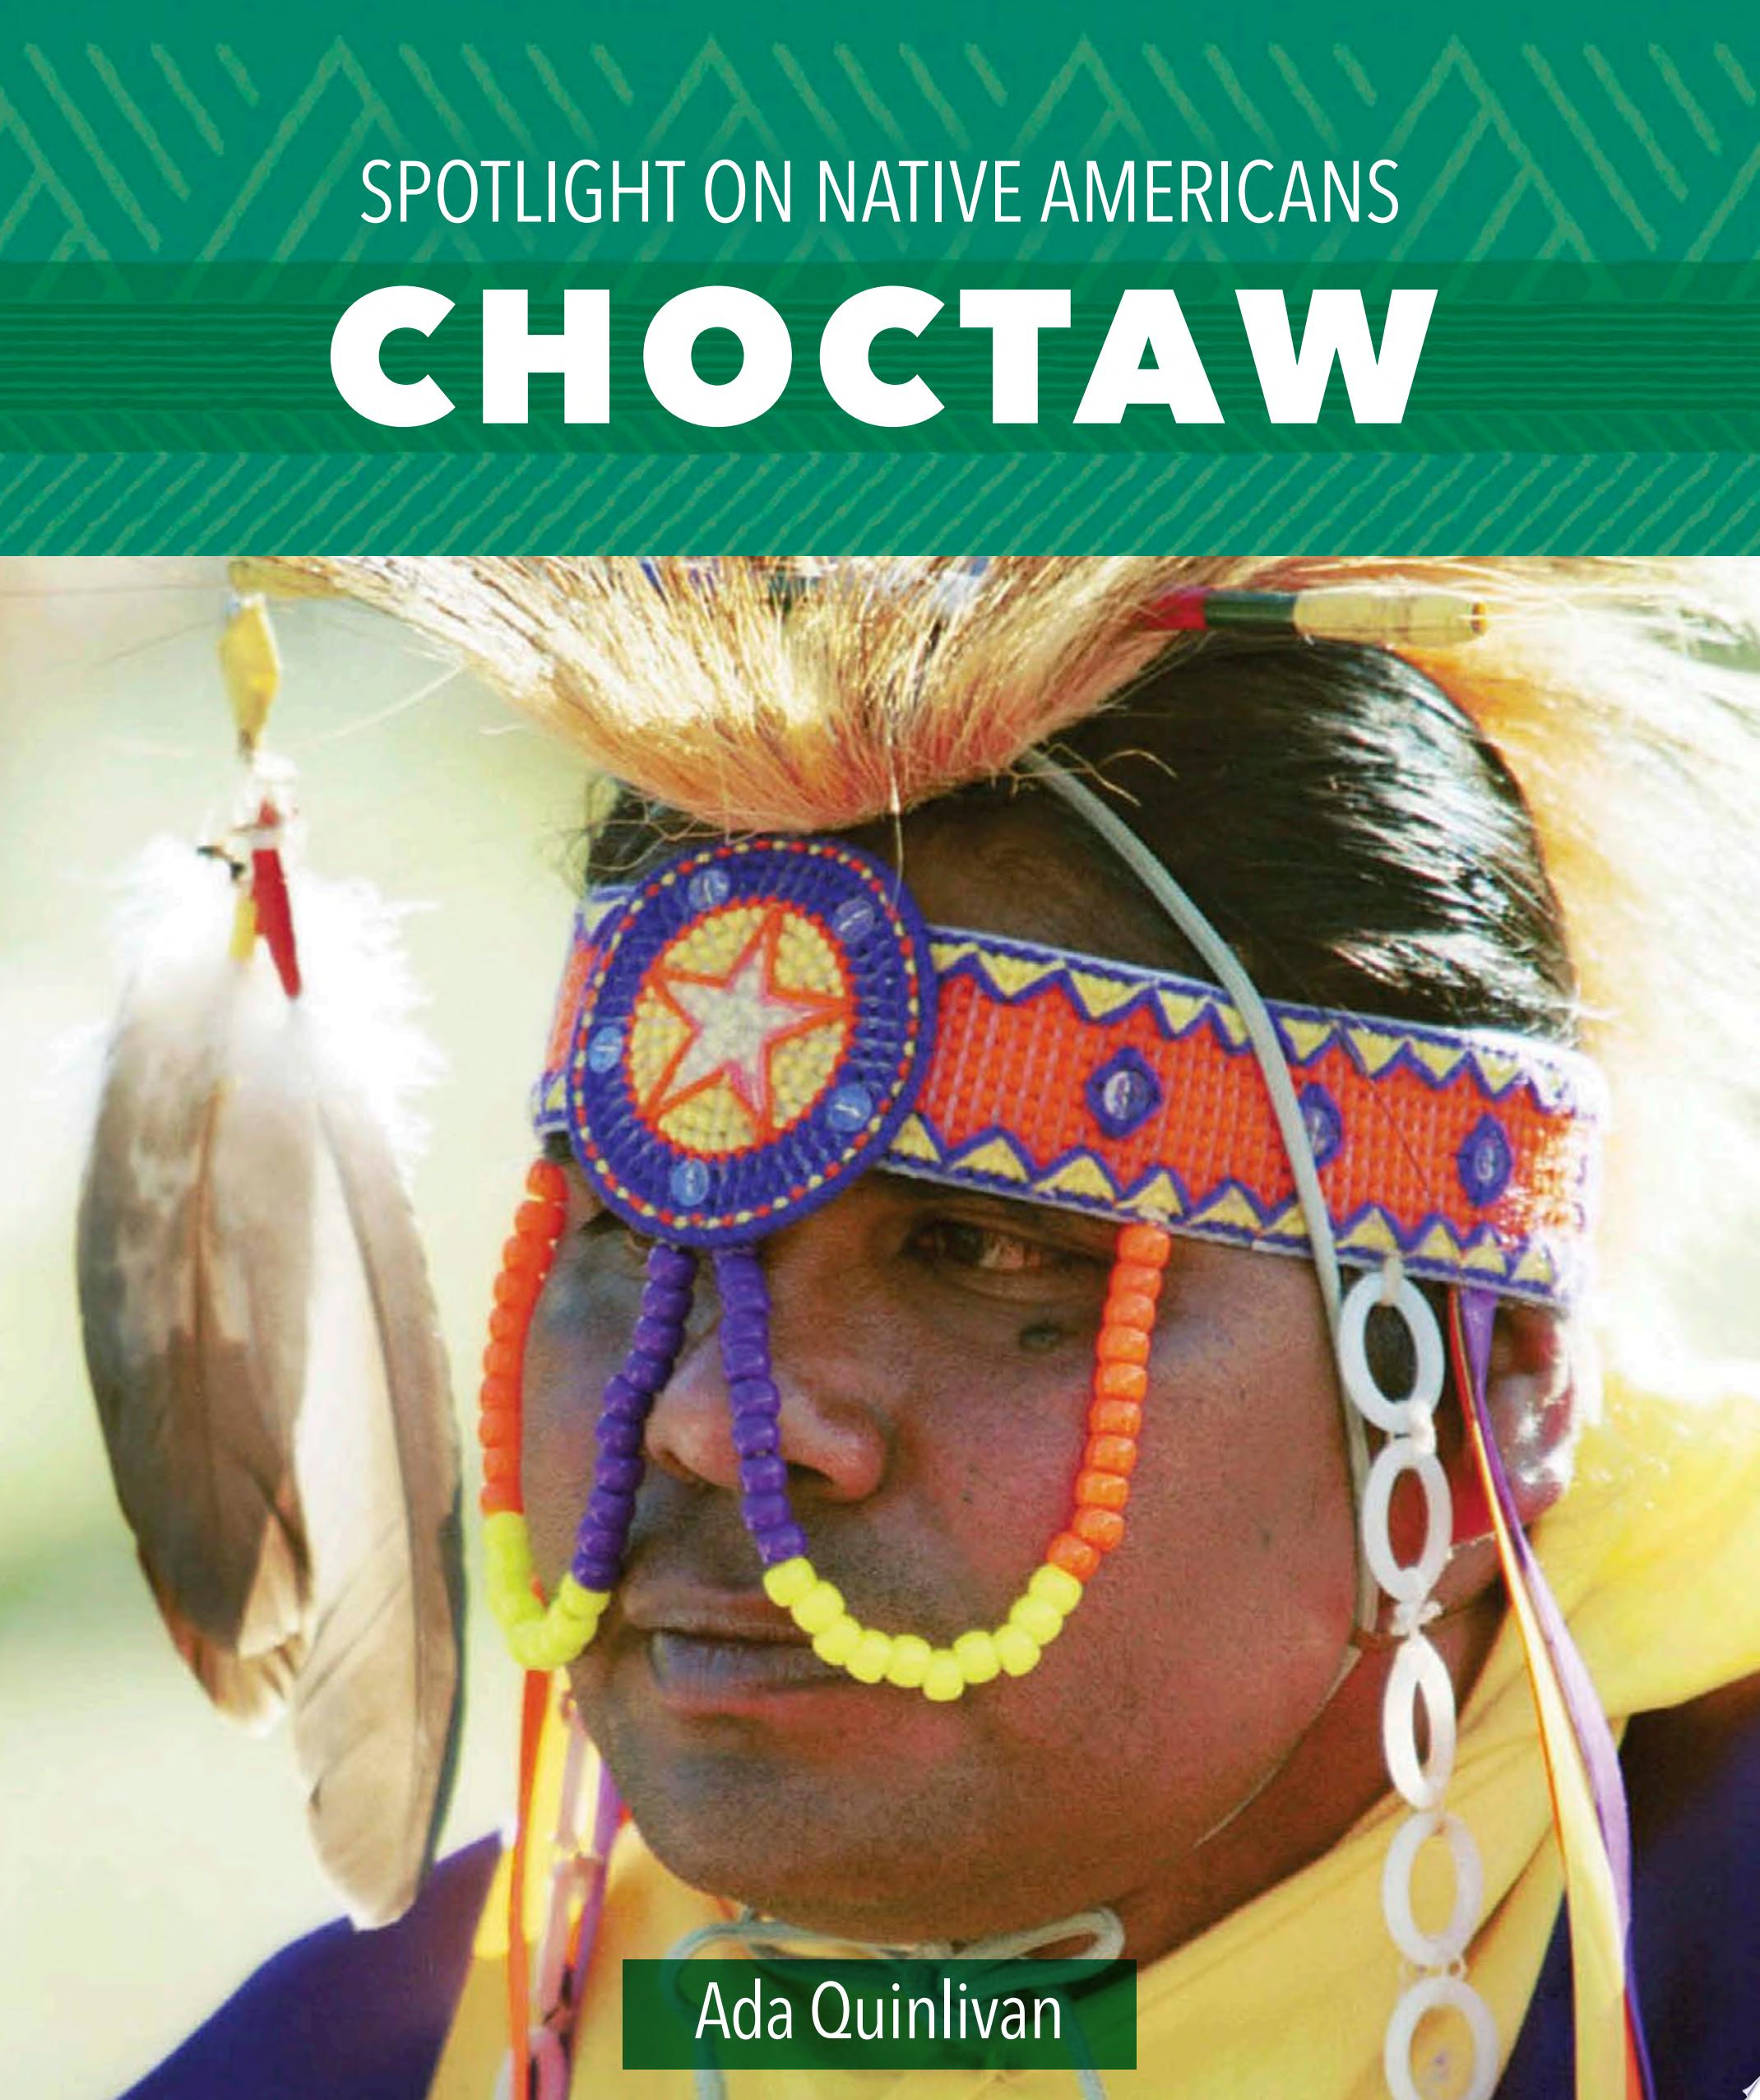 Image for "Choctaw"